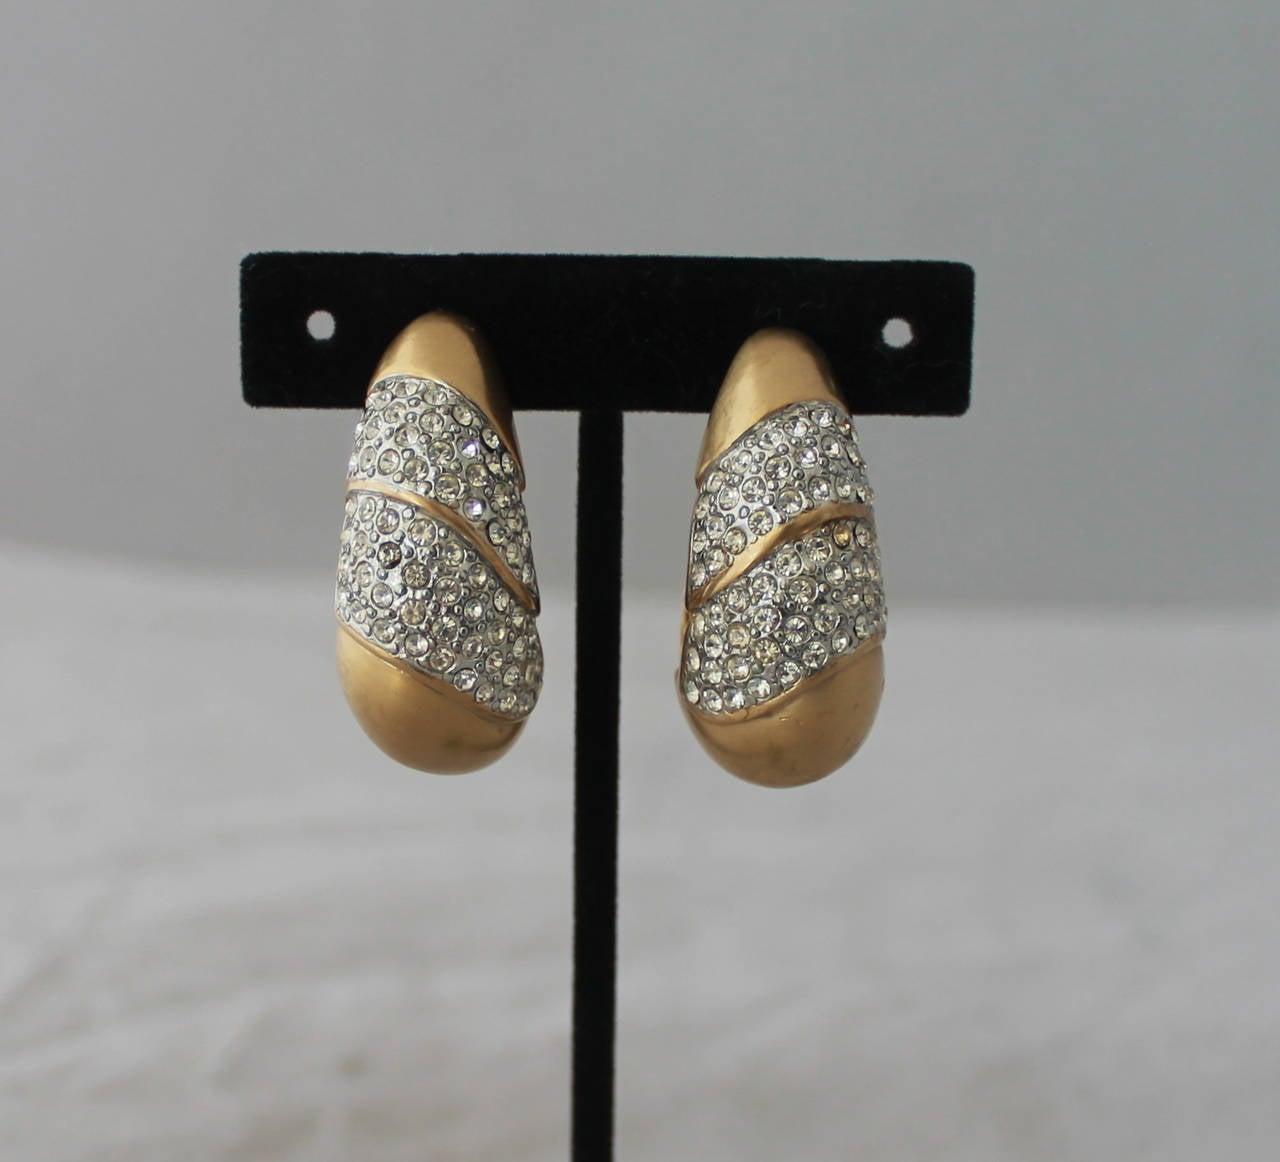 Les Bernard 1980's Vintage Goldtone & Rhinestone Clip-on Hoops. These hoops are in very good vintage condition with minor discoloring on the rhinestones on one of the hoops
.
Length- 1.75